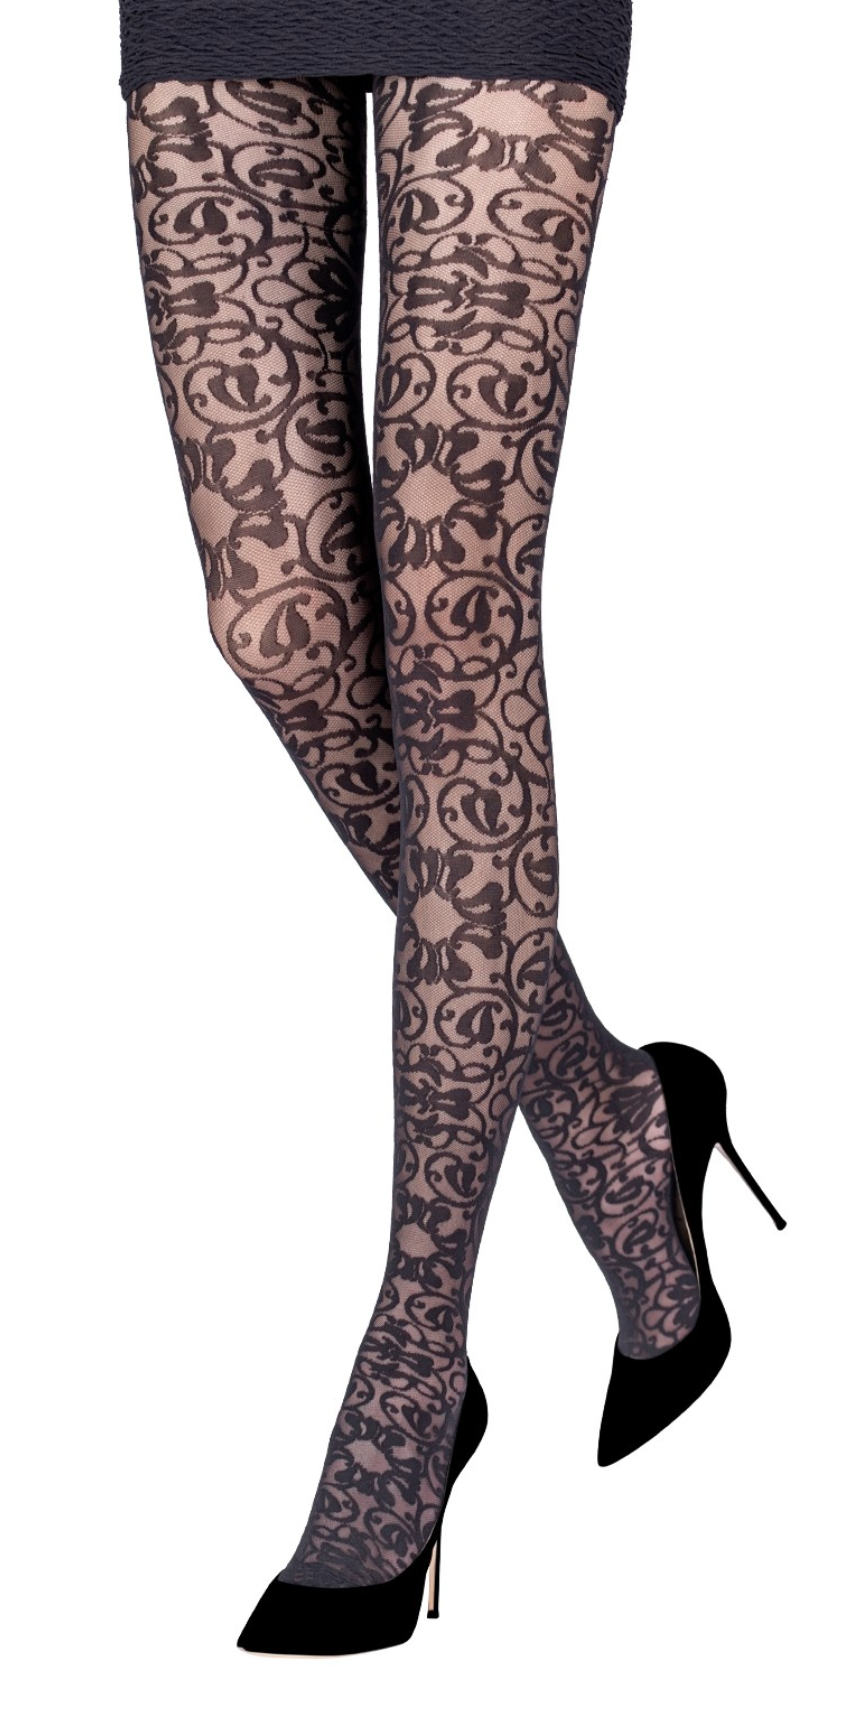 Emilio Cavallini Petunia Tights - Sheer black micromesh tights with a rococo style floral lace pattern.